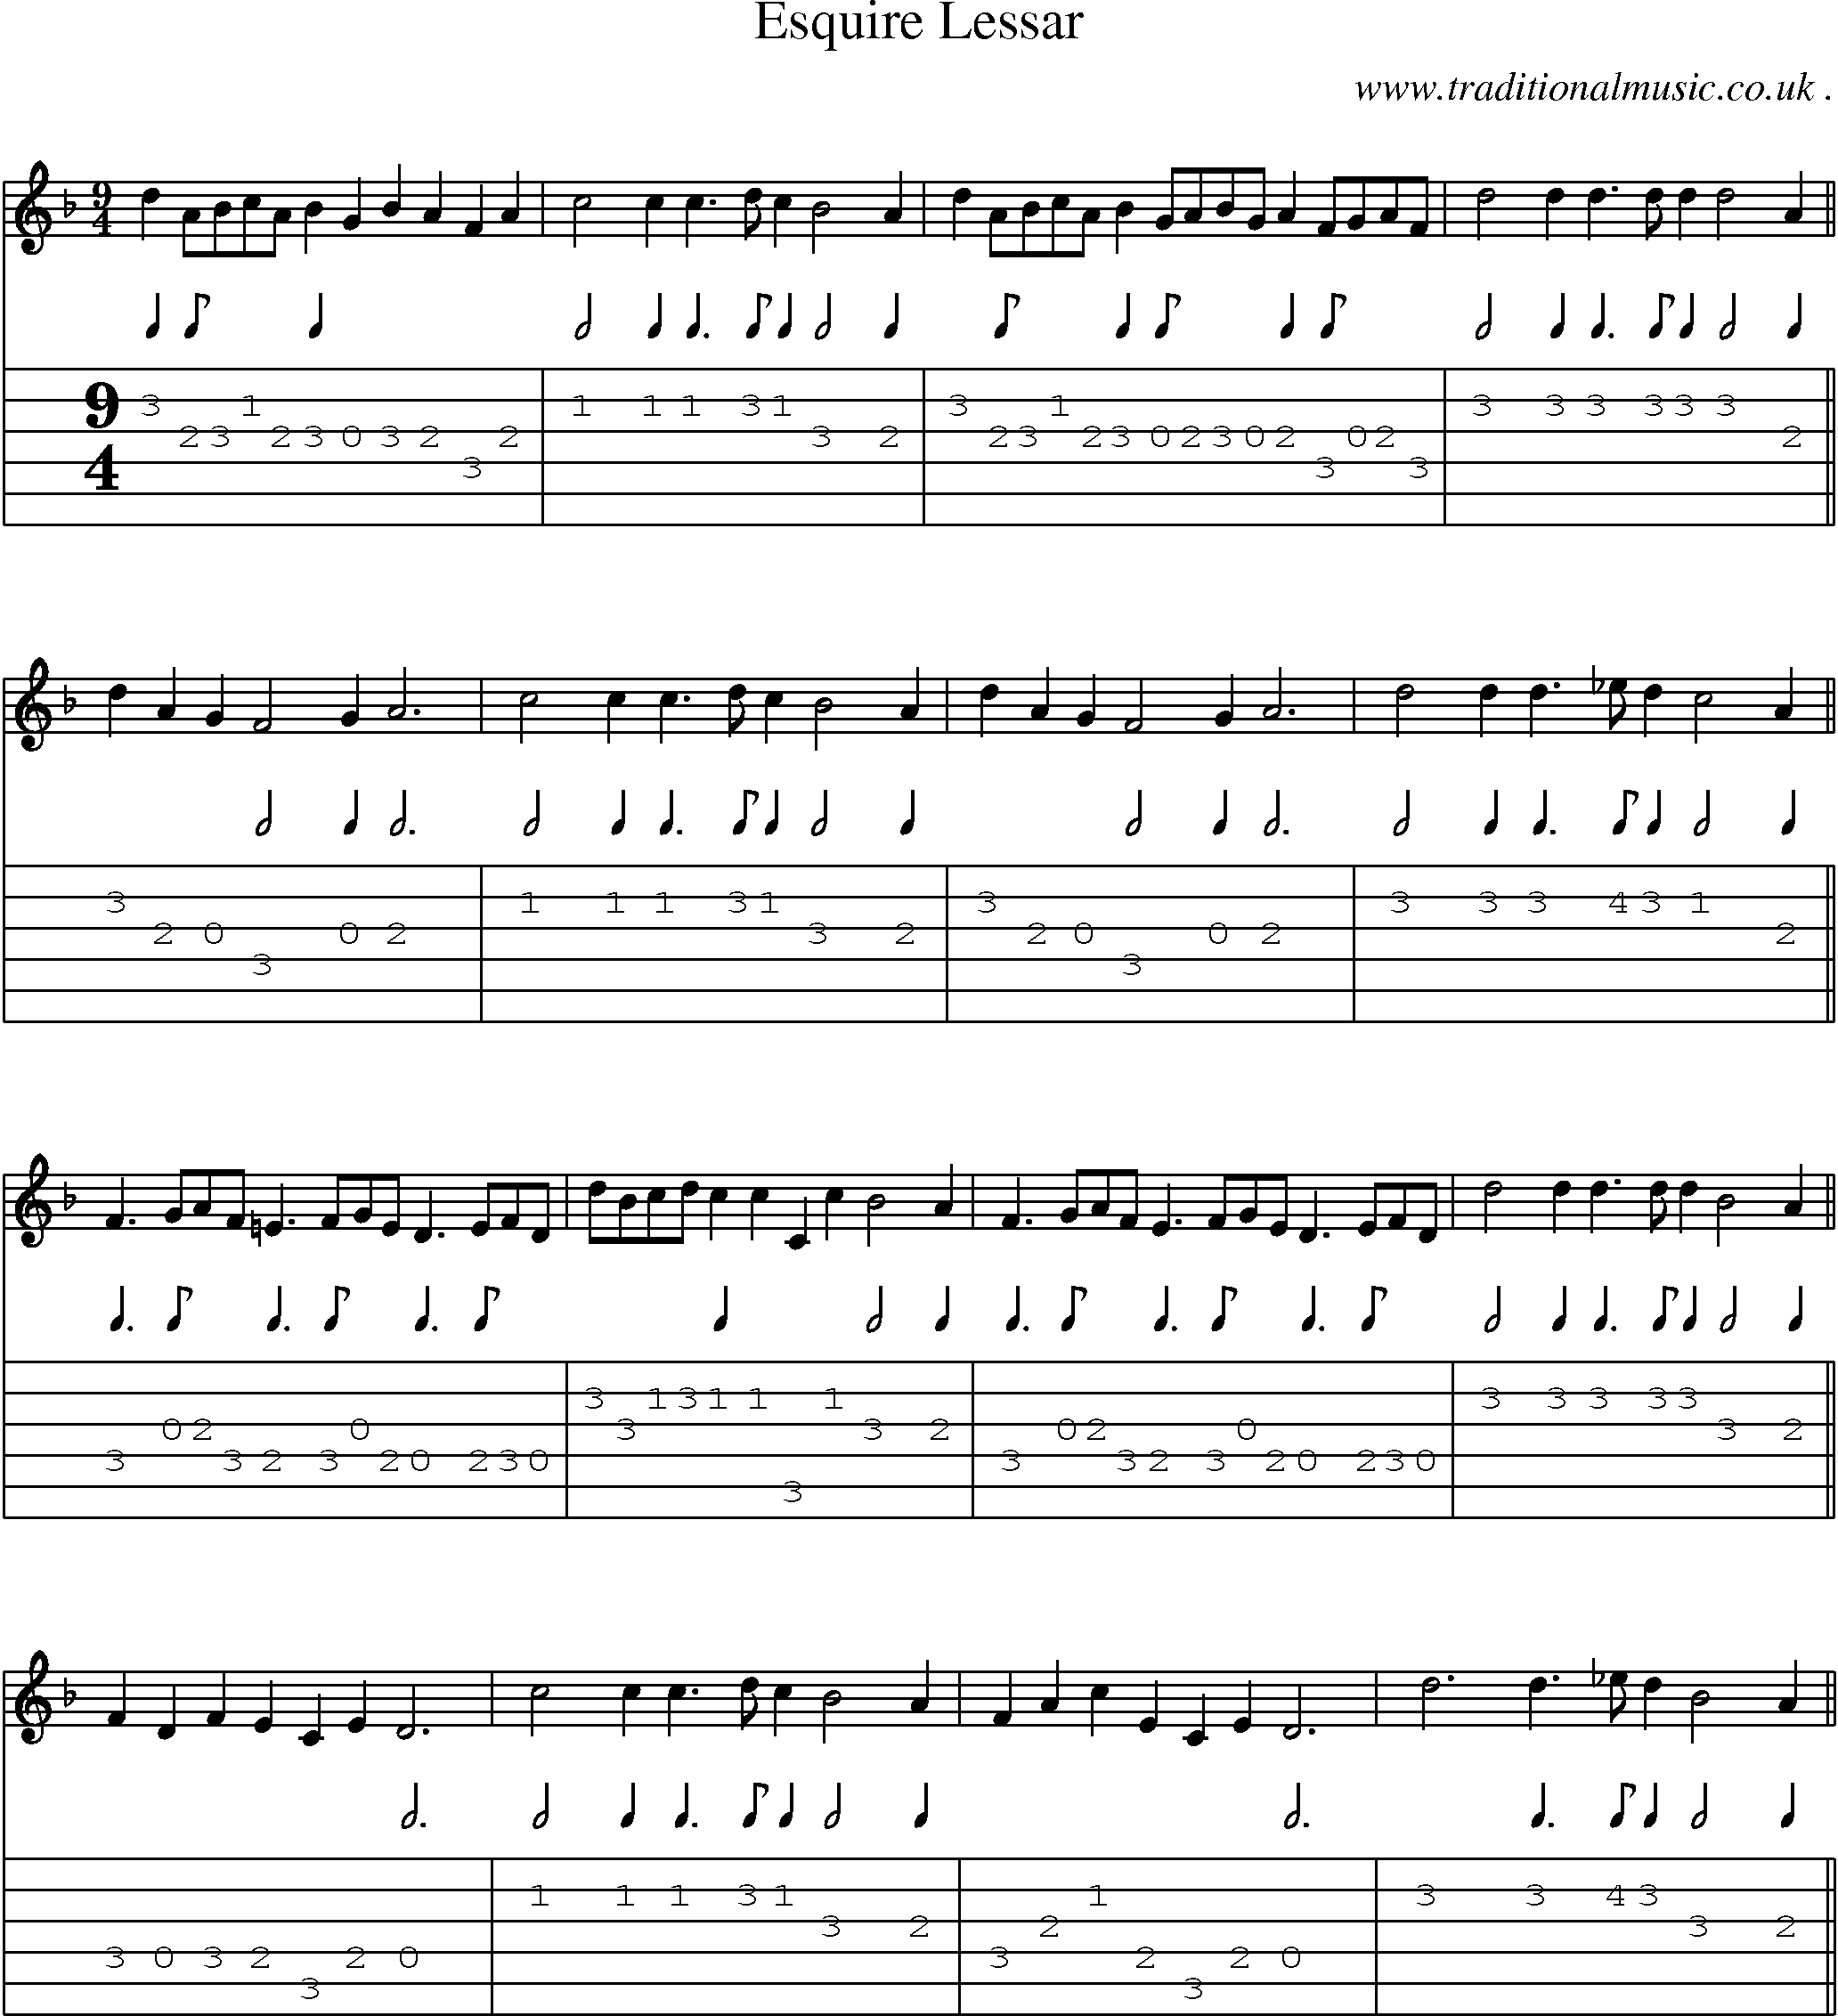 Sheet-Music and Guitar Tabs for Esquire Lessar